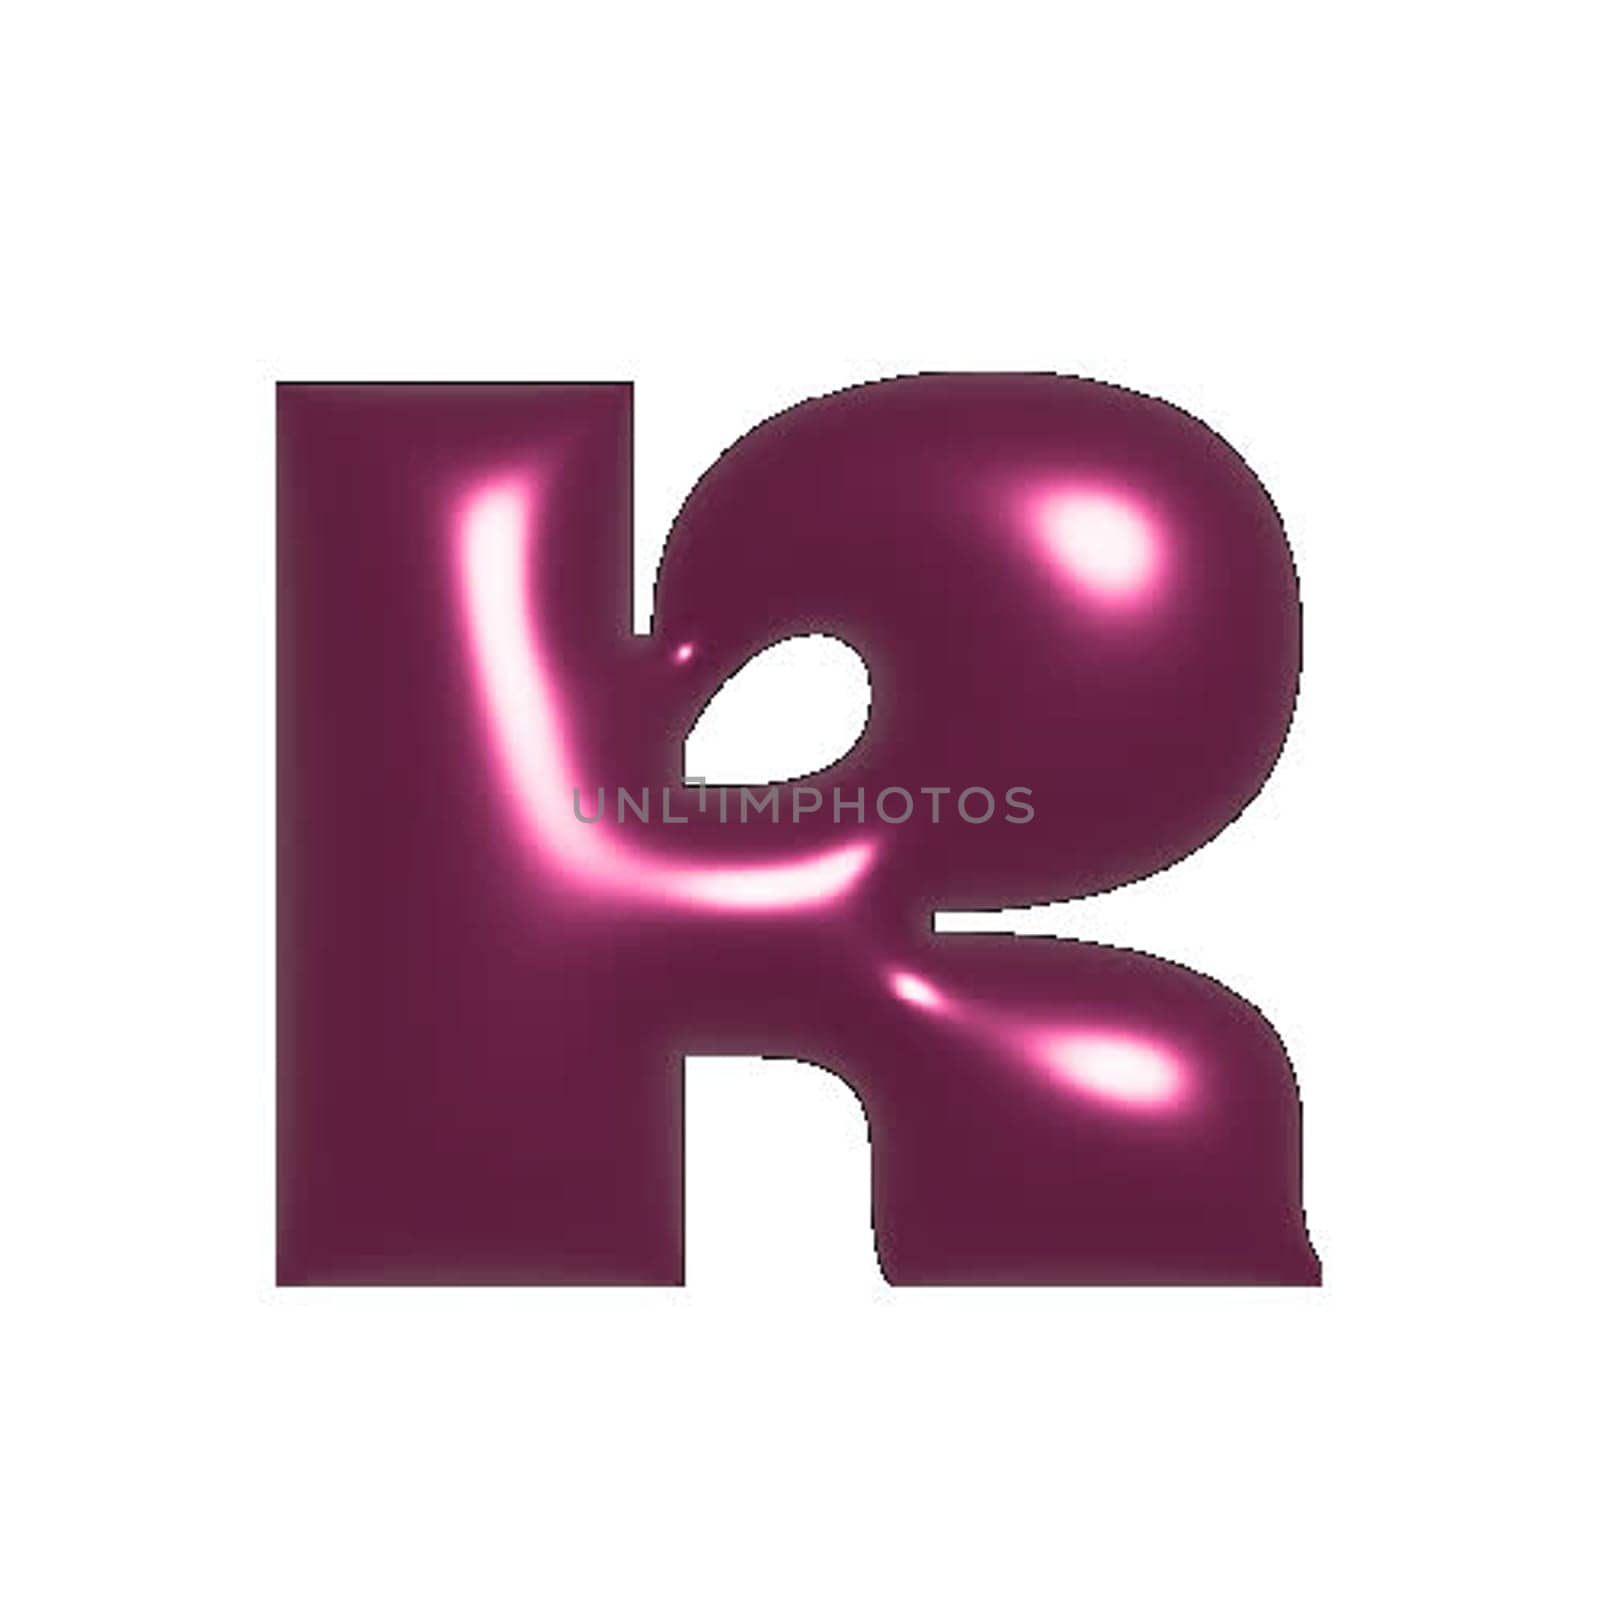 Red metal shiny reflective letter R 3D illustration by Dustick